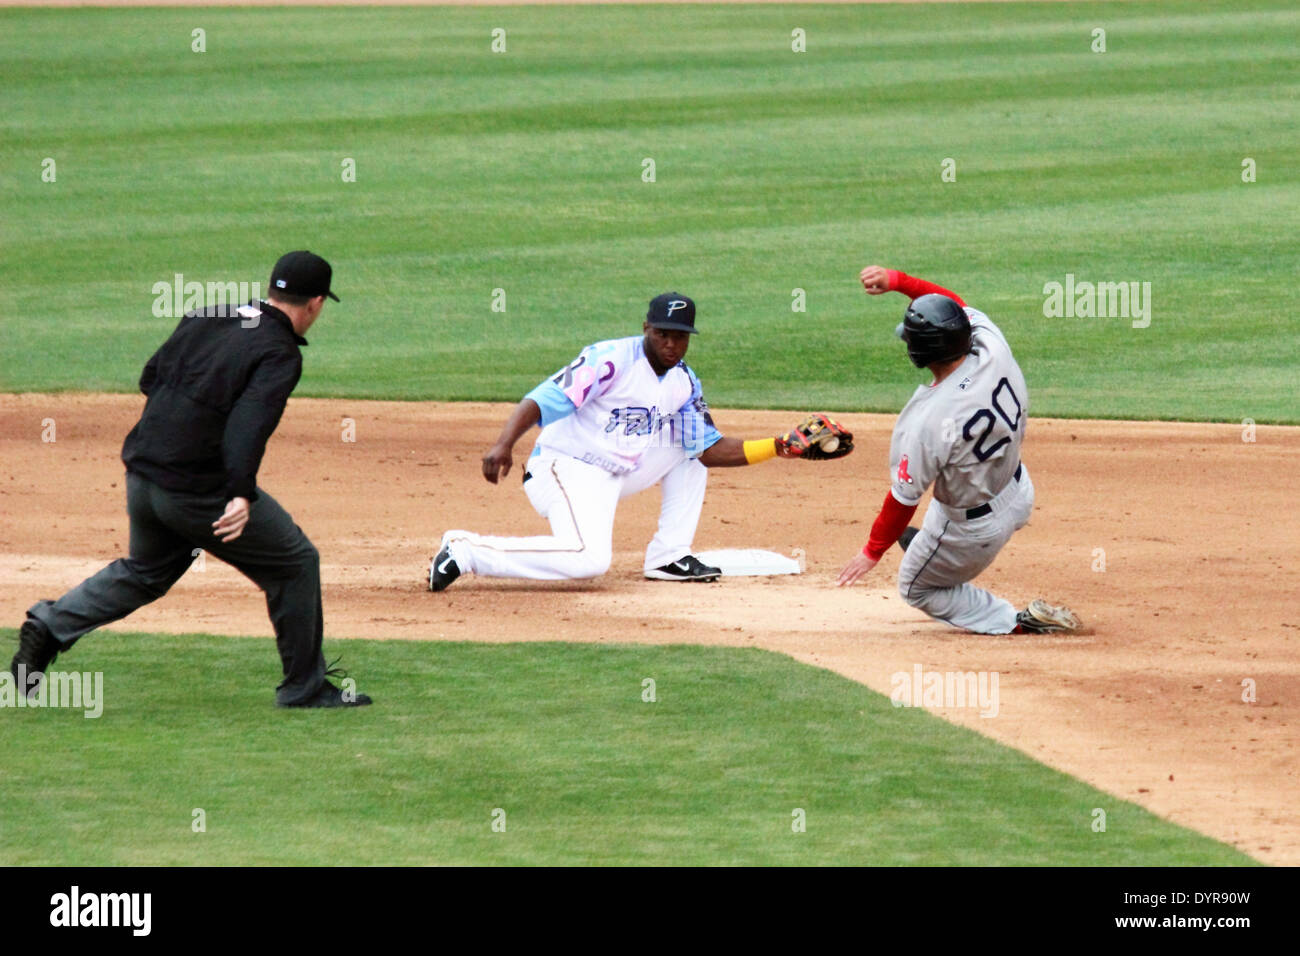 A runner slides into second attempting to steal second base. Stock Photo